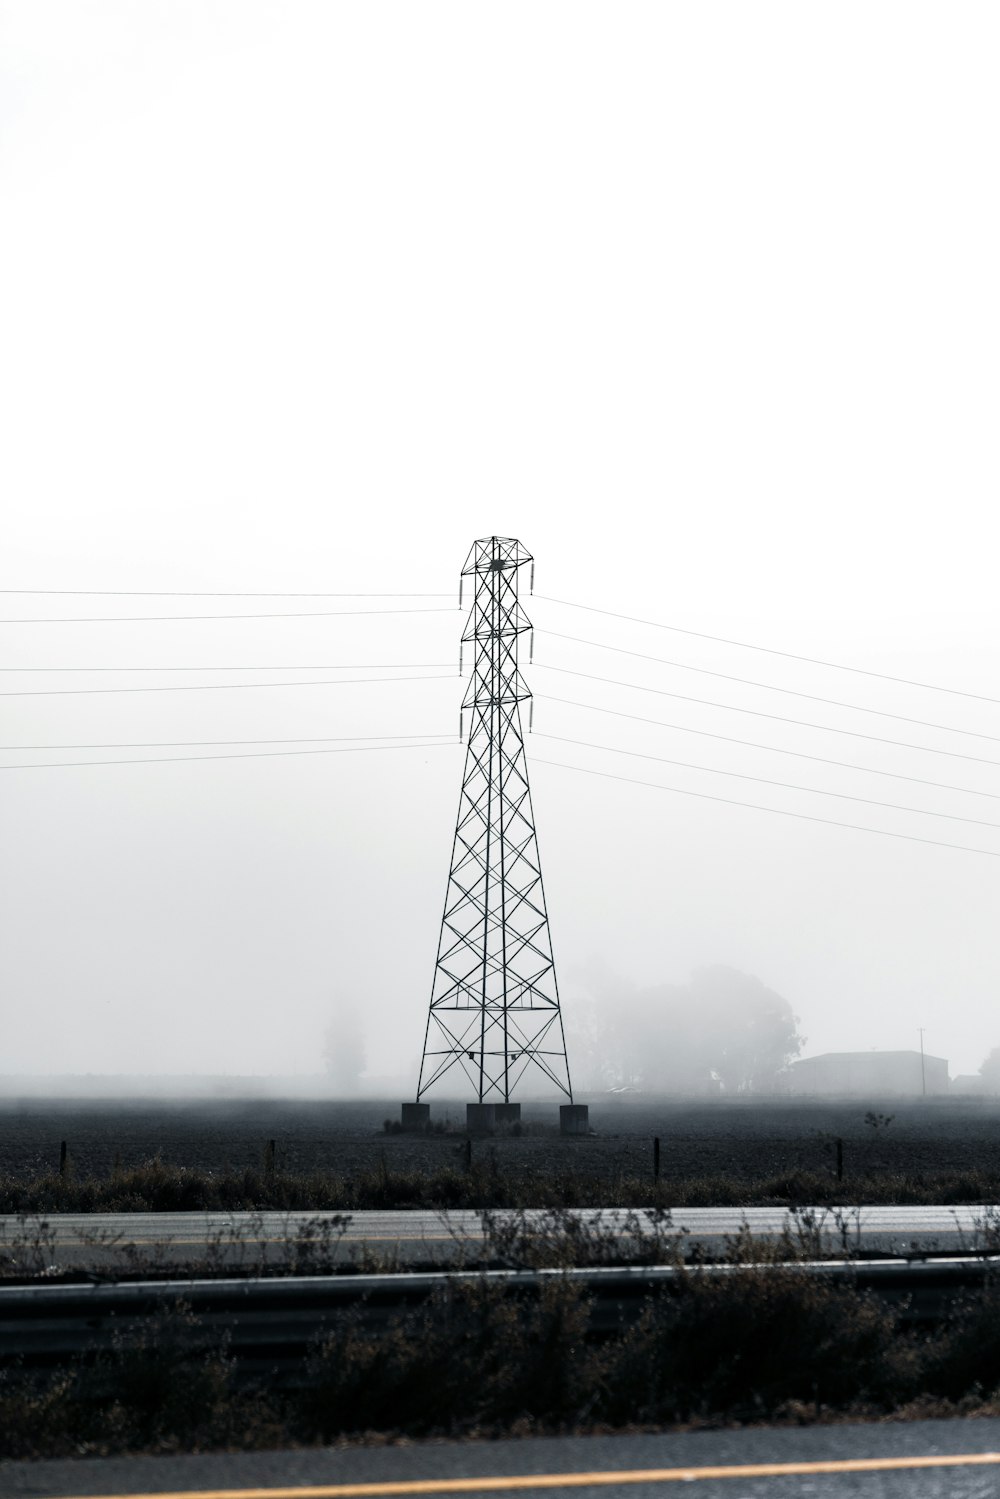 landscape photography of an electric tower under a calm white sky